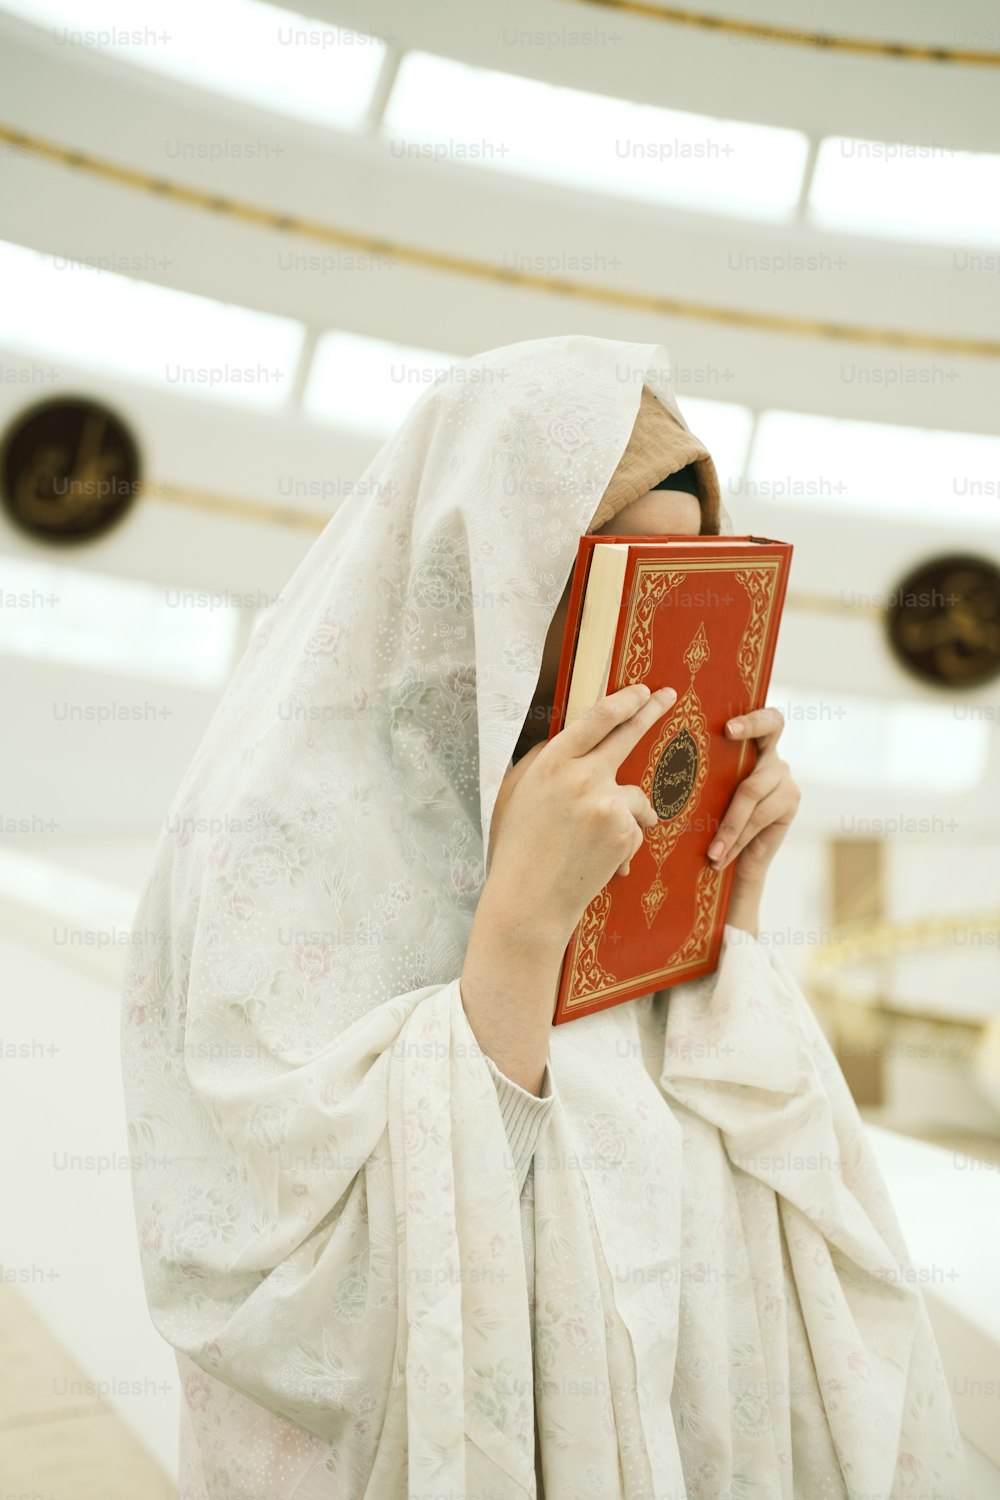 a woman in a white veil holding a red book